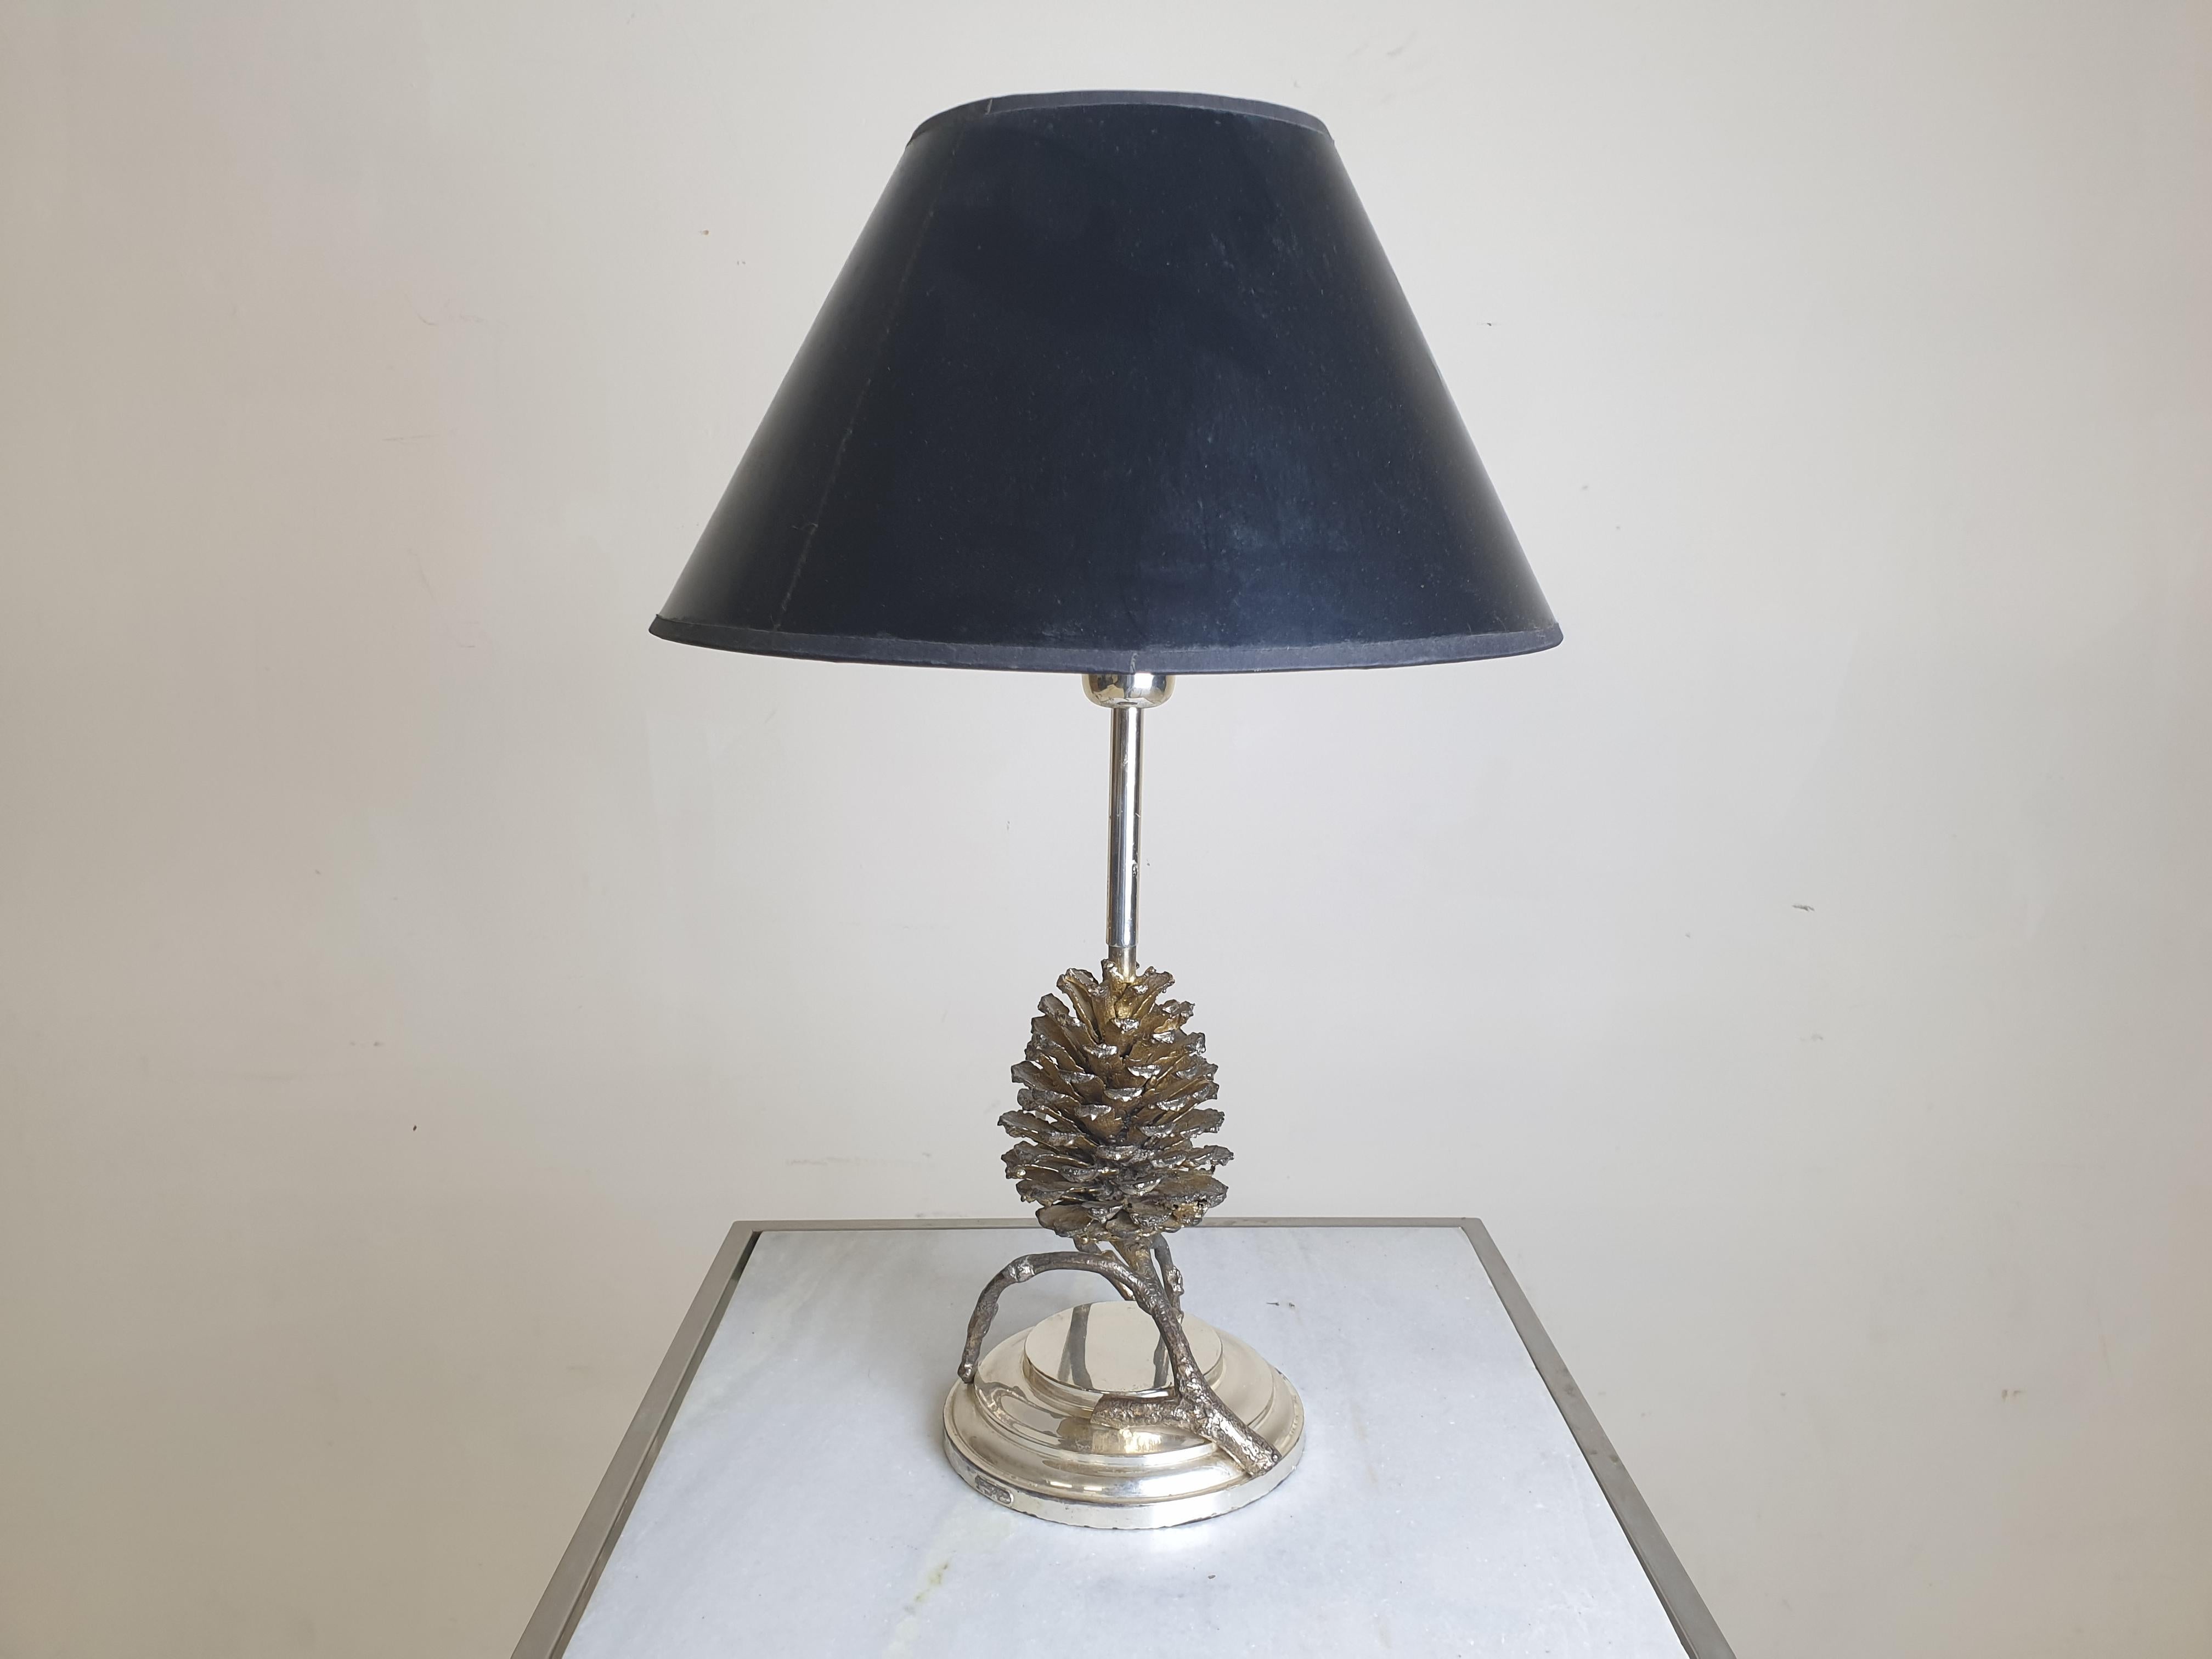 A luxurious, high-quality table lamp, made by Franco Lapini in Italy in the 1970s.

Franco Lapini is a maker of luxury items. Everything is made by hand and is a unique object.

Our lamp is a pine cone made of bronze on a silver-plated base. The